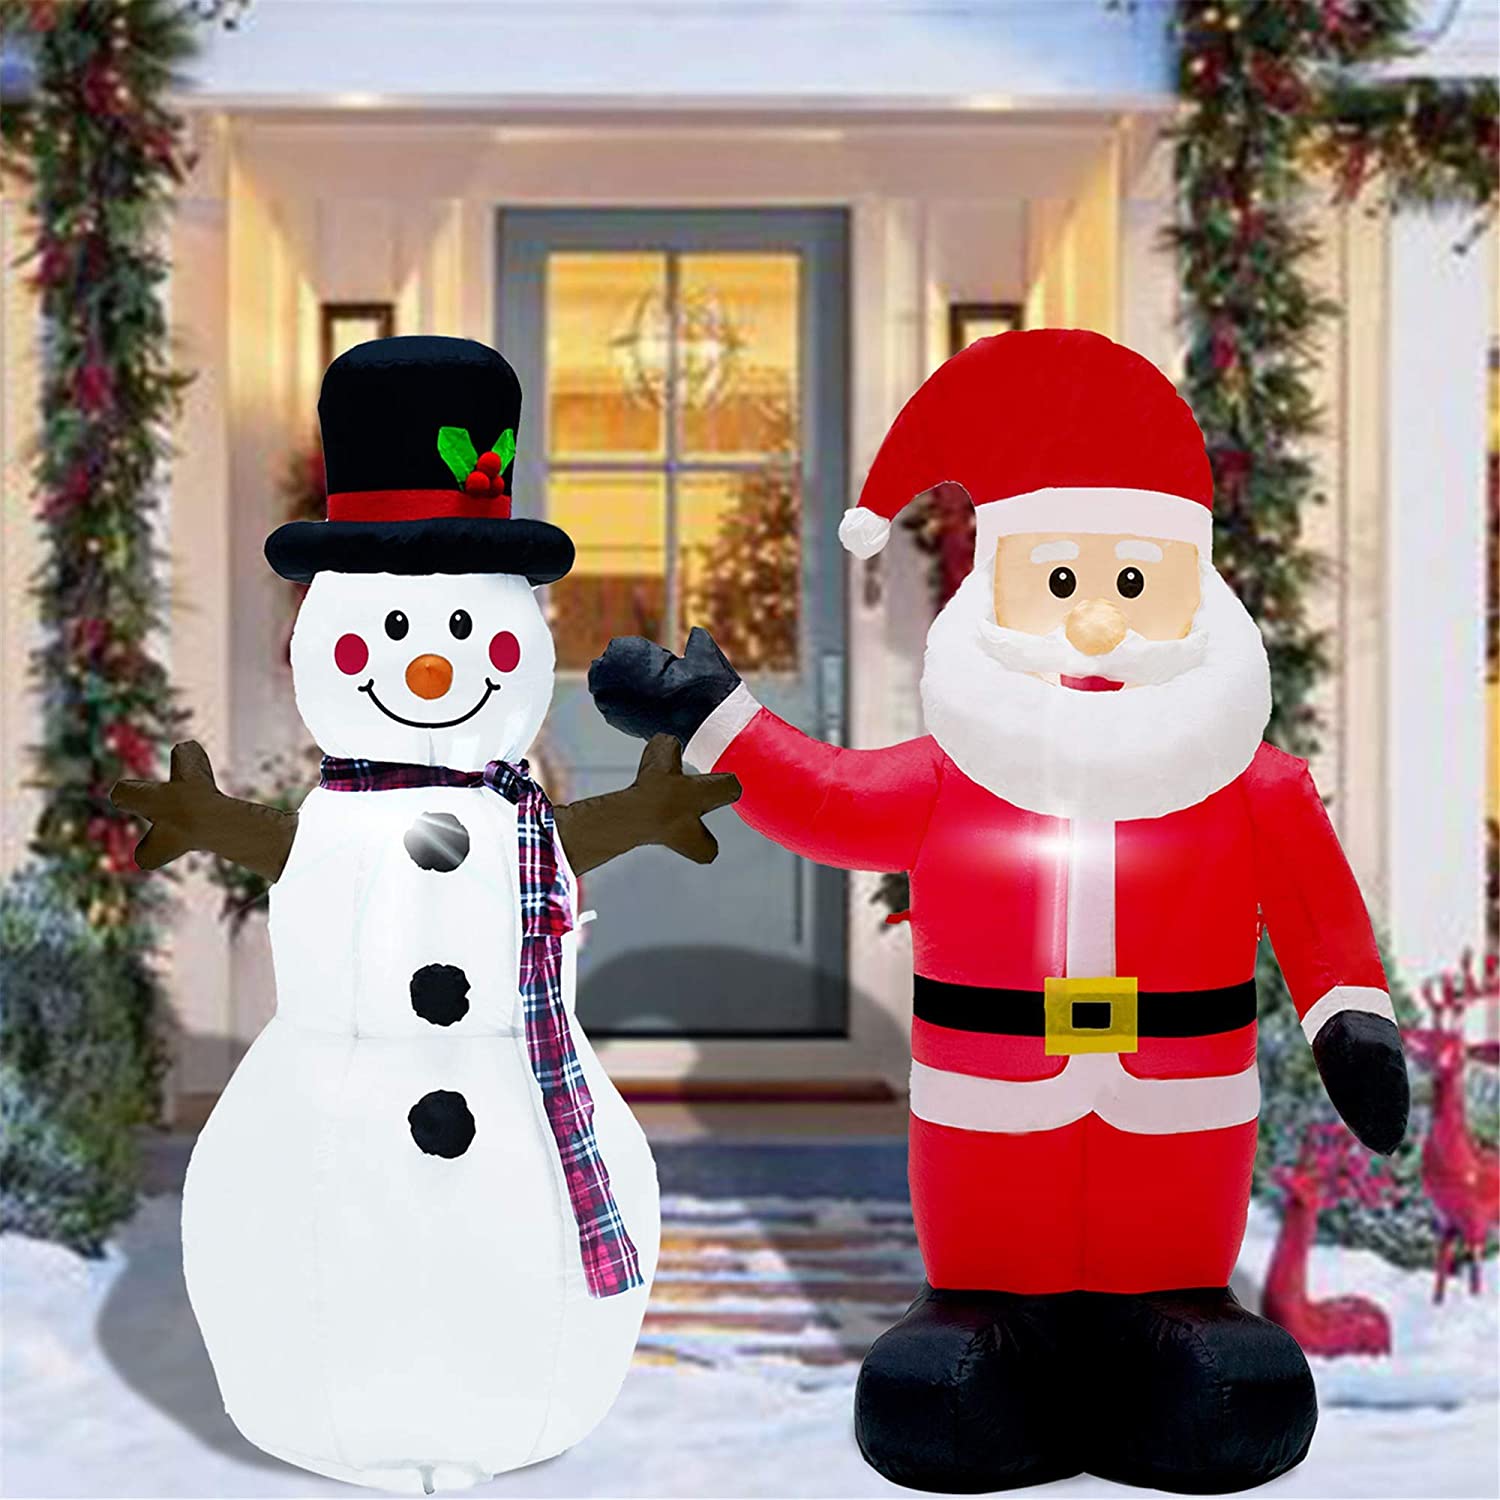 Twinkle Star Lighted Santa Claus & Snowman Outdoor Inflatables, 4-Foot